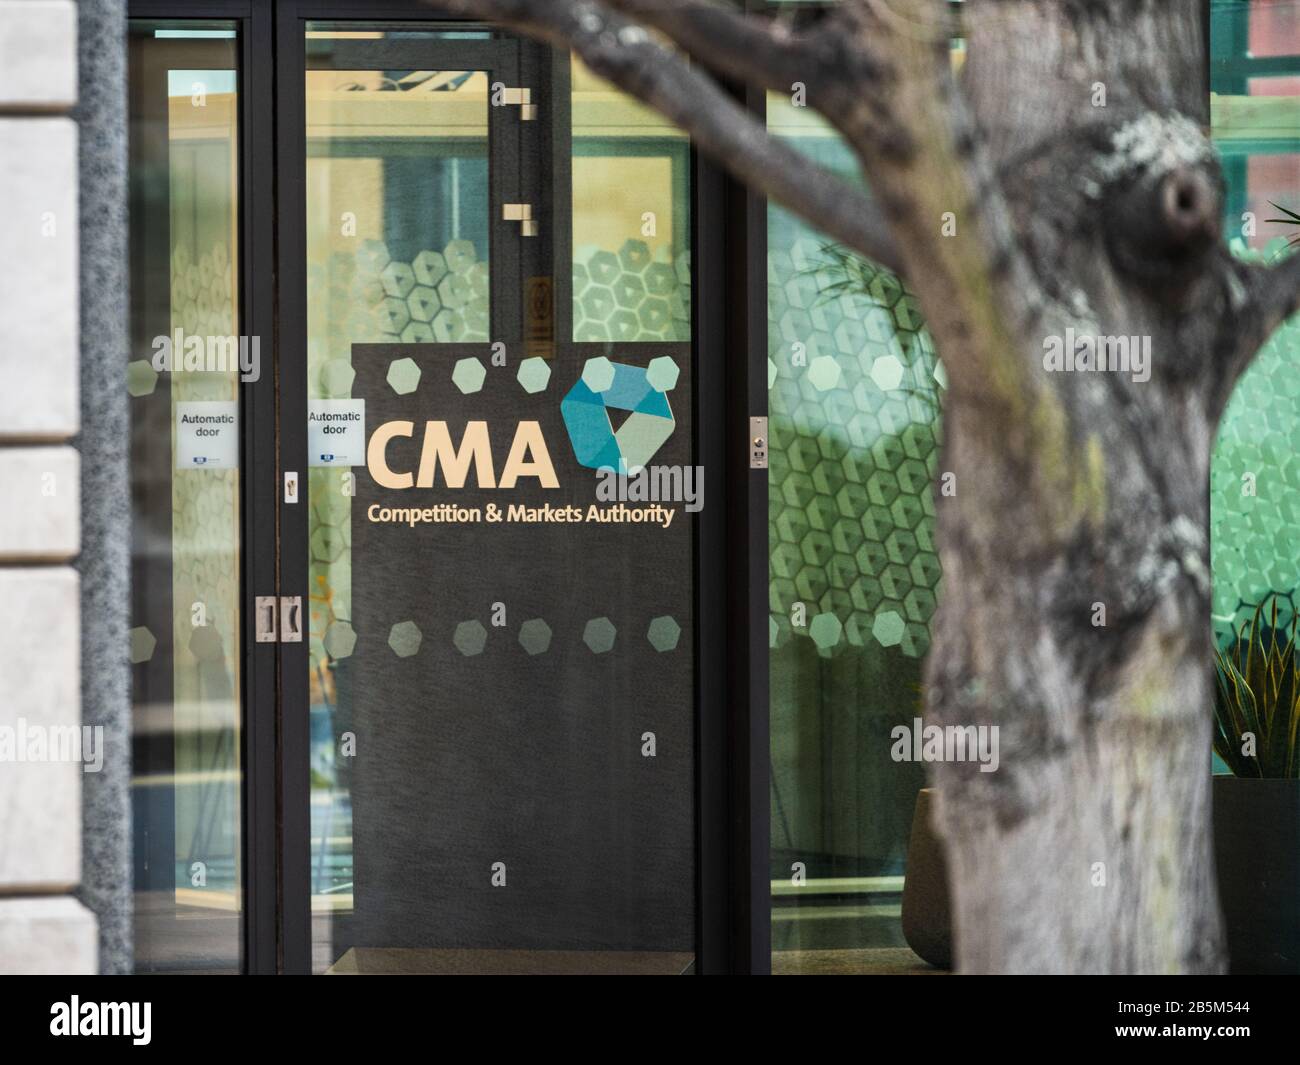 CMA HQ London The Competition and Markets Authority - siège de la Competition & Markets Authority du Royaume-Uni ou CMA au 25 Cabot Square, Canary Wharf, Londres Banque D'Images